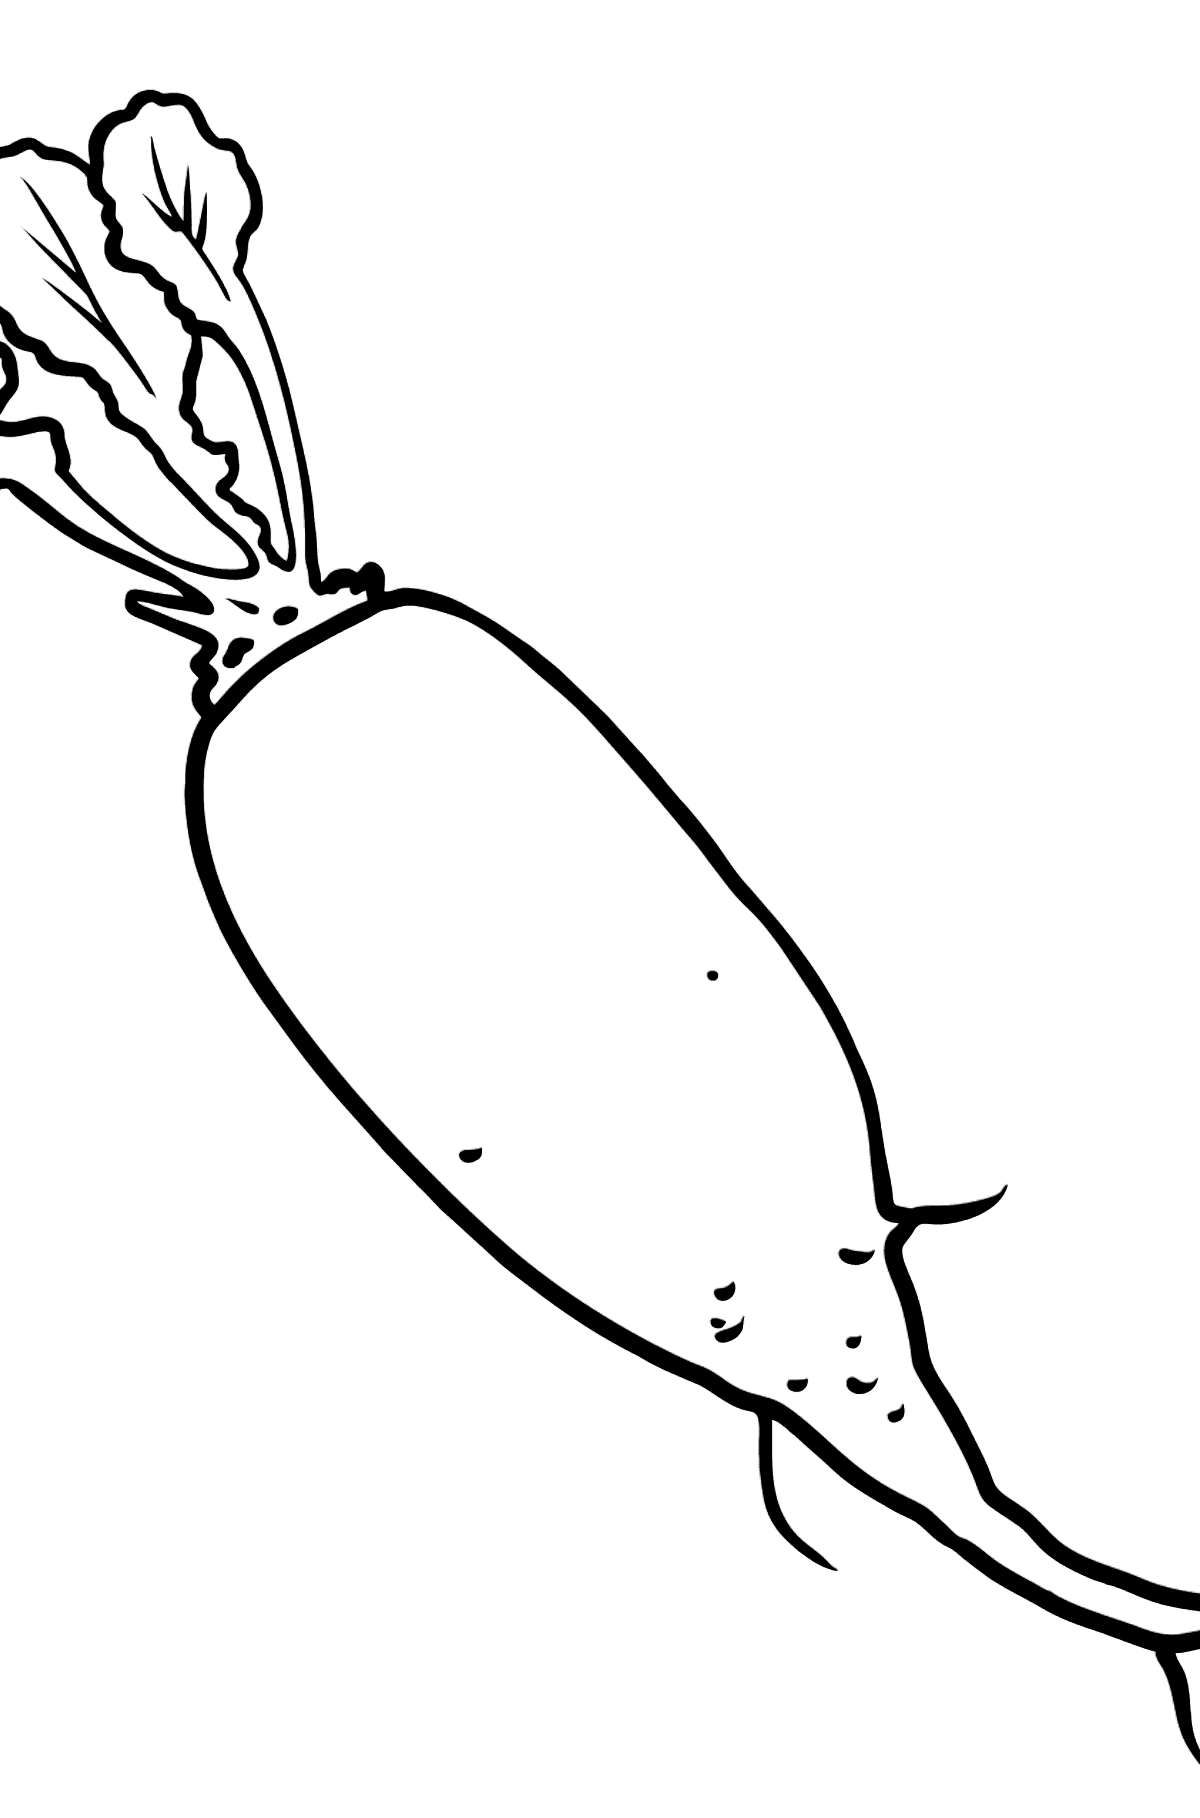 Daikon coloring page - Coloring Pages for Kids